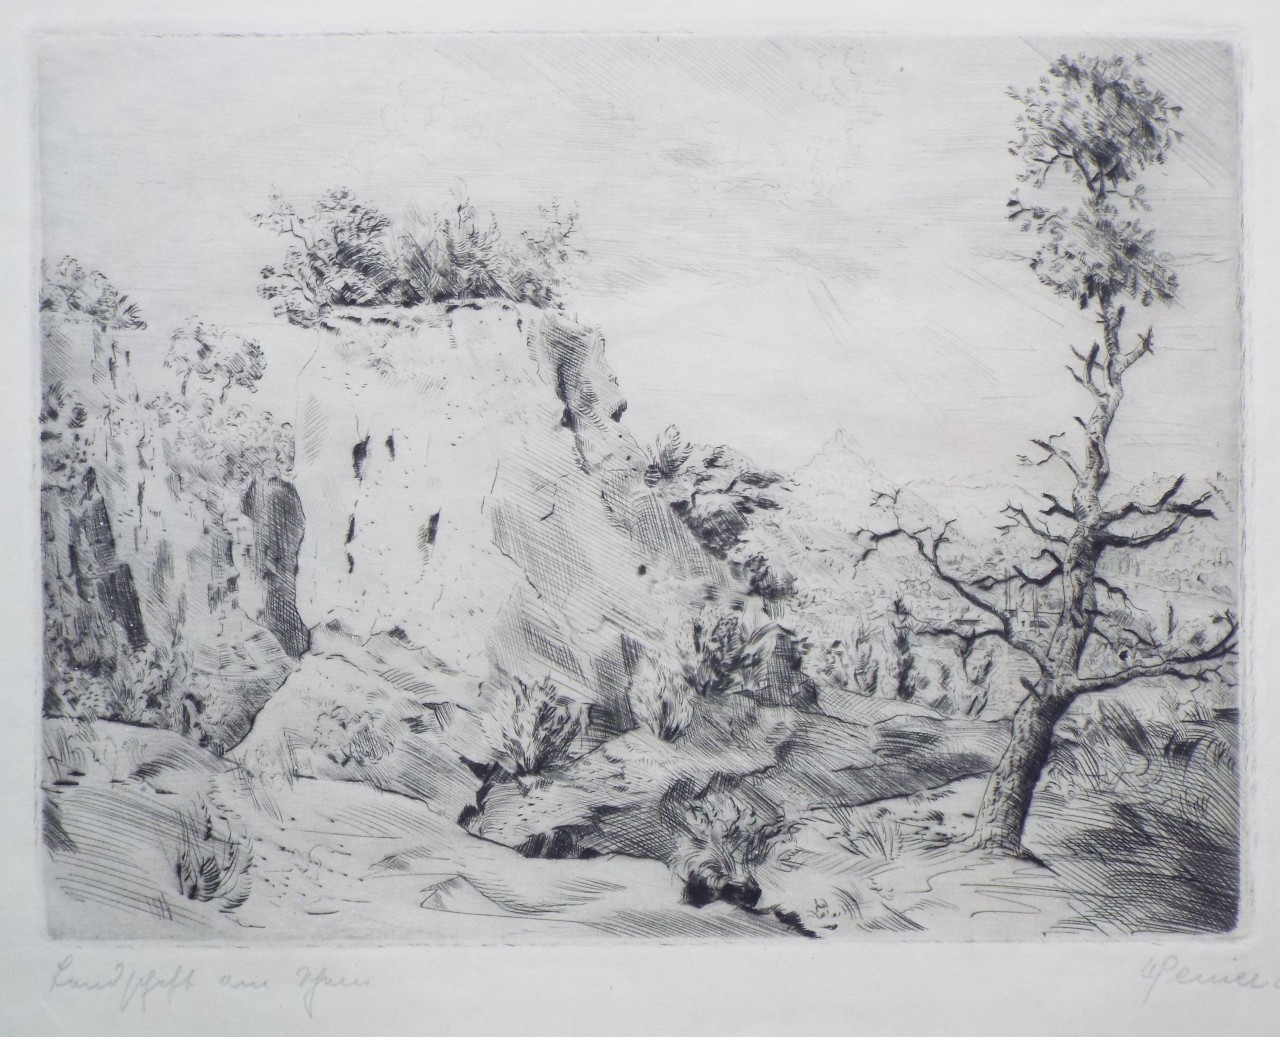 Etching - Landscape with a rocky outcrop.landscape etching